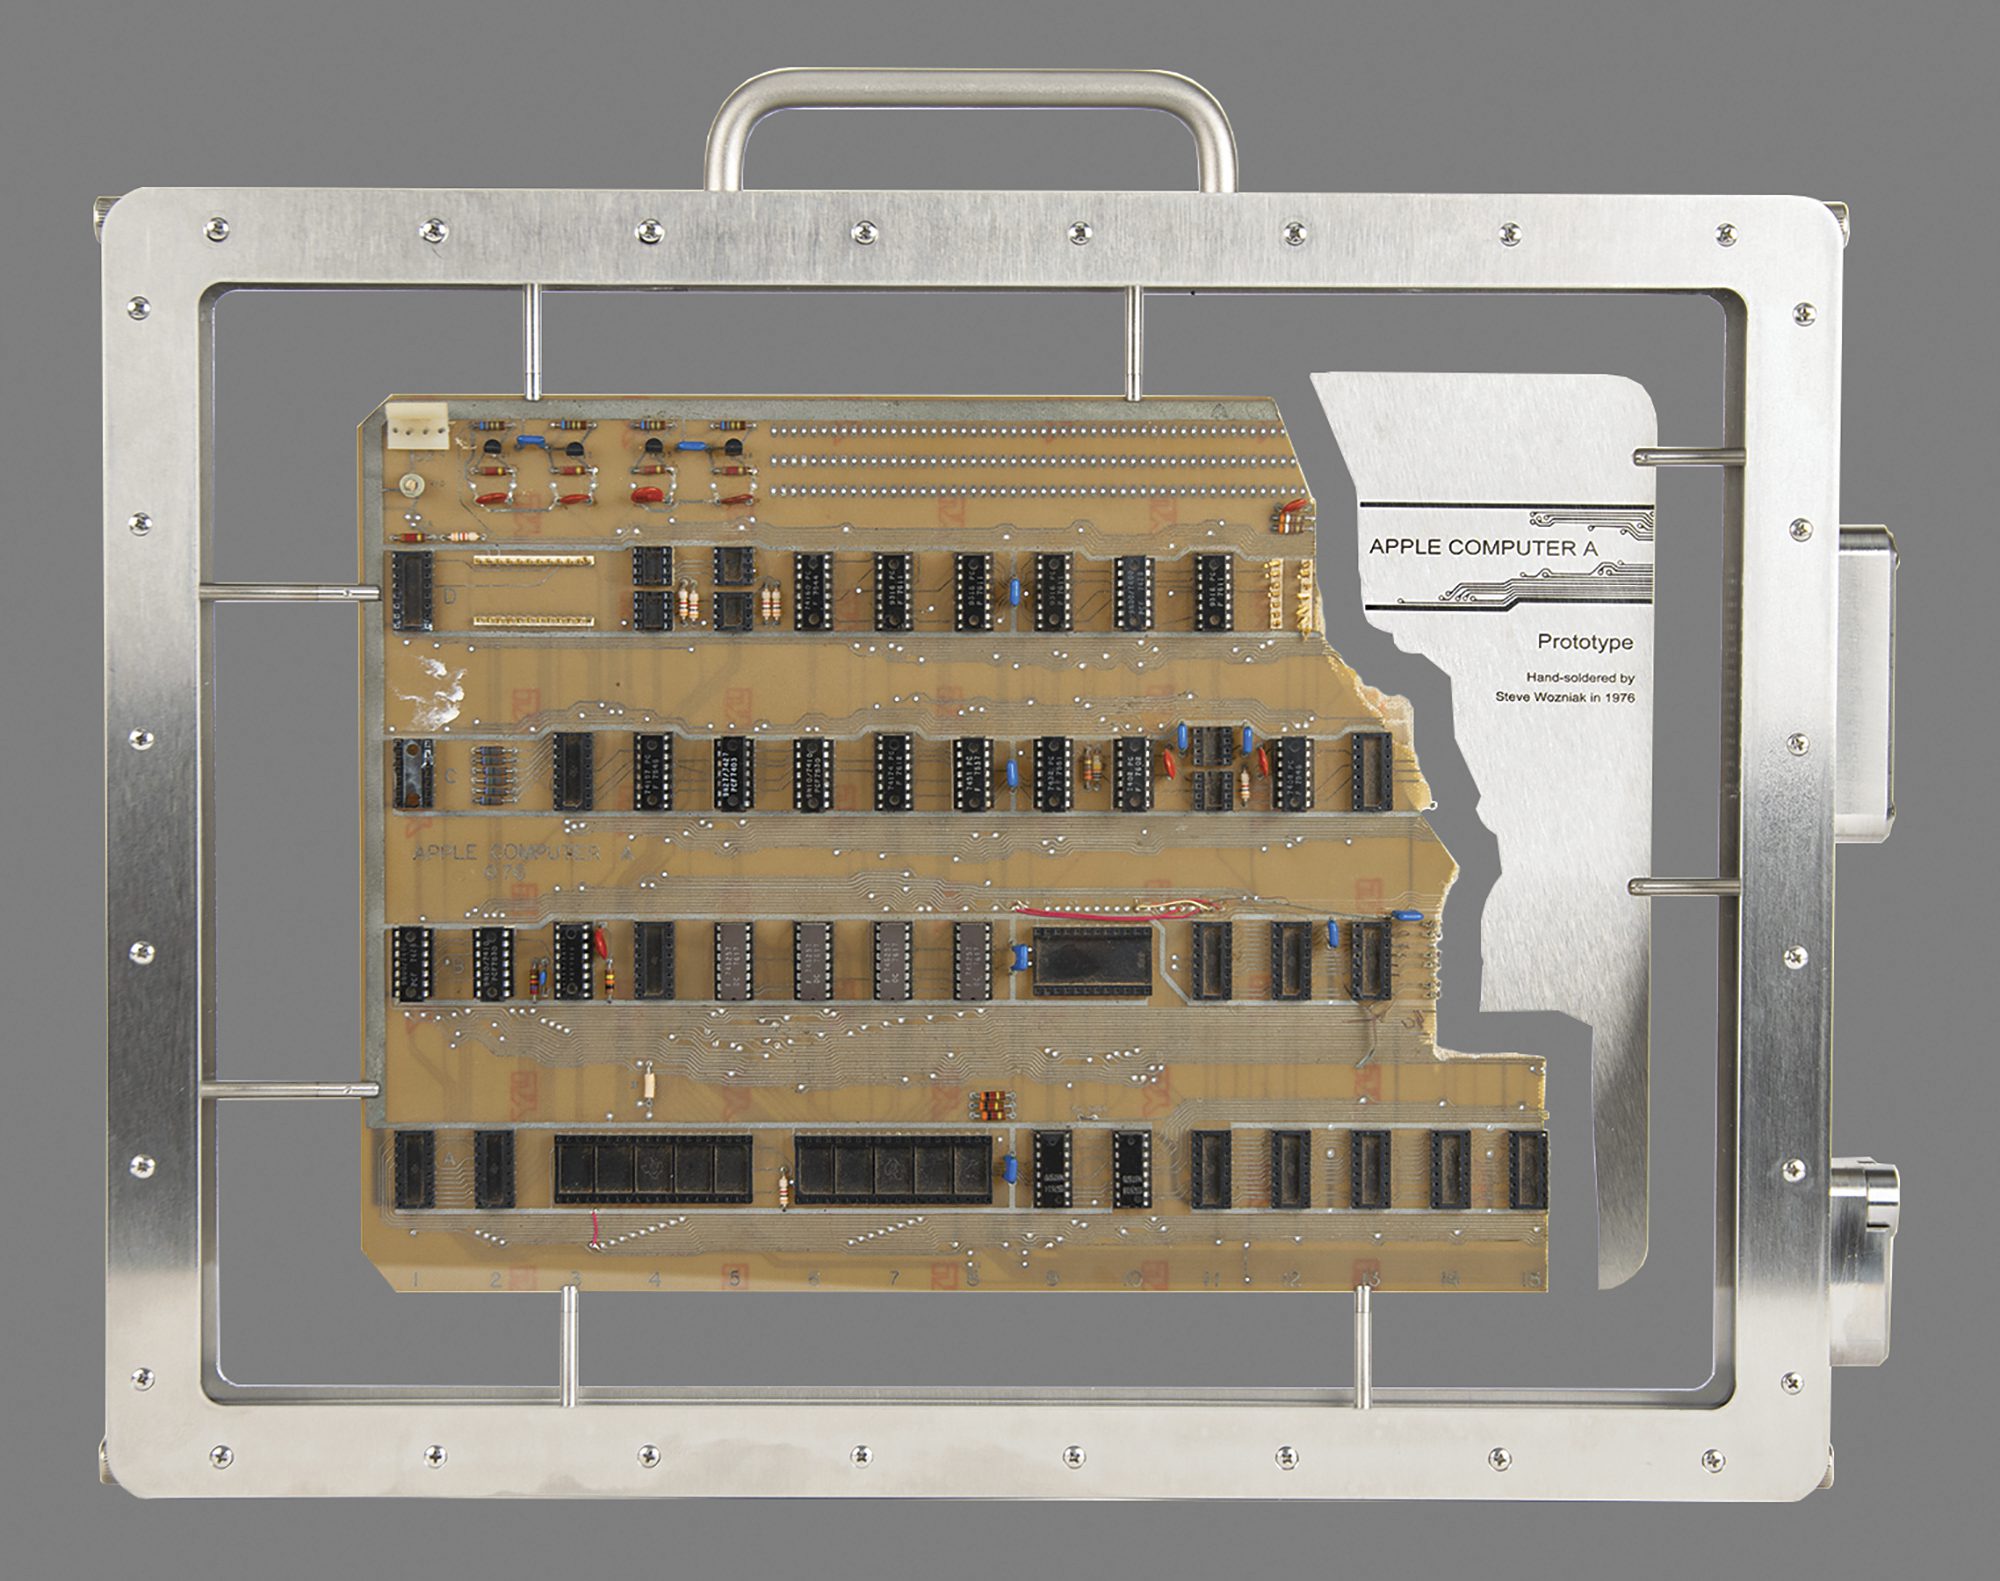 Photo posted by RR Auction of the Apple-1 computer prototype (RR Auction via AP)